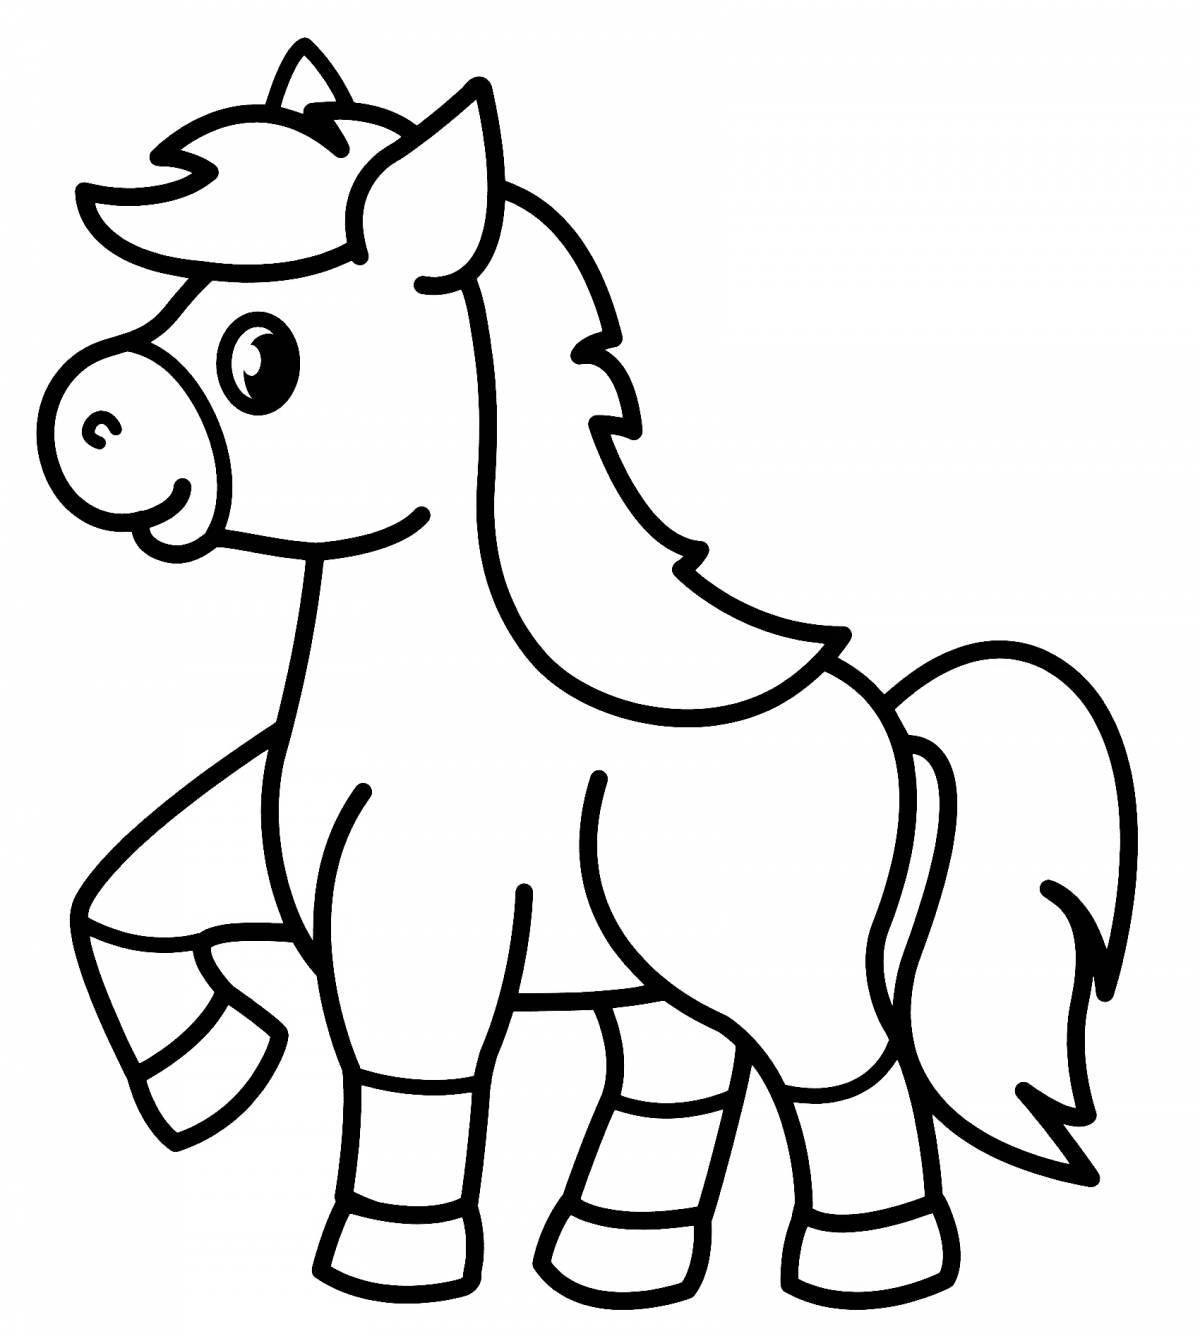 Outstanding horse coloring page for 3-4 year olds